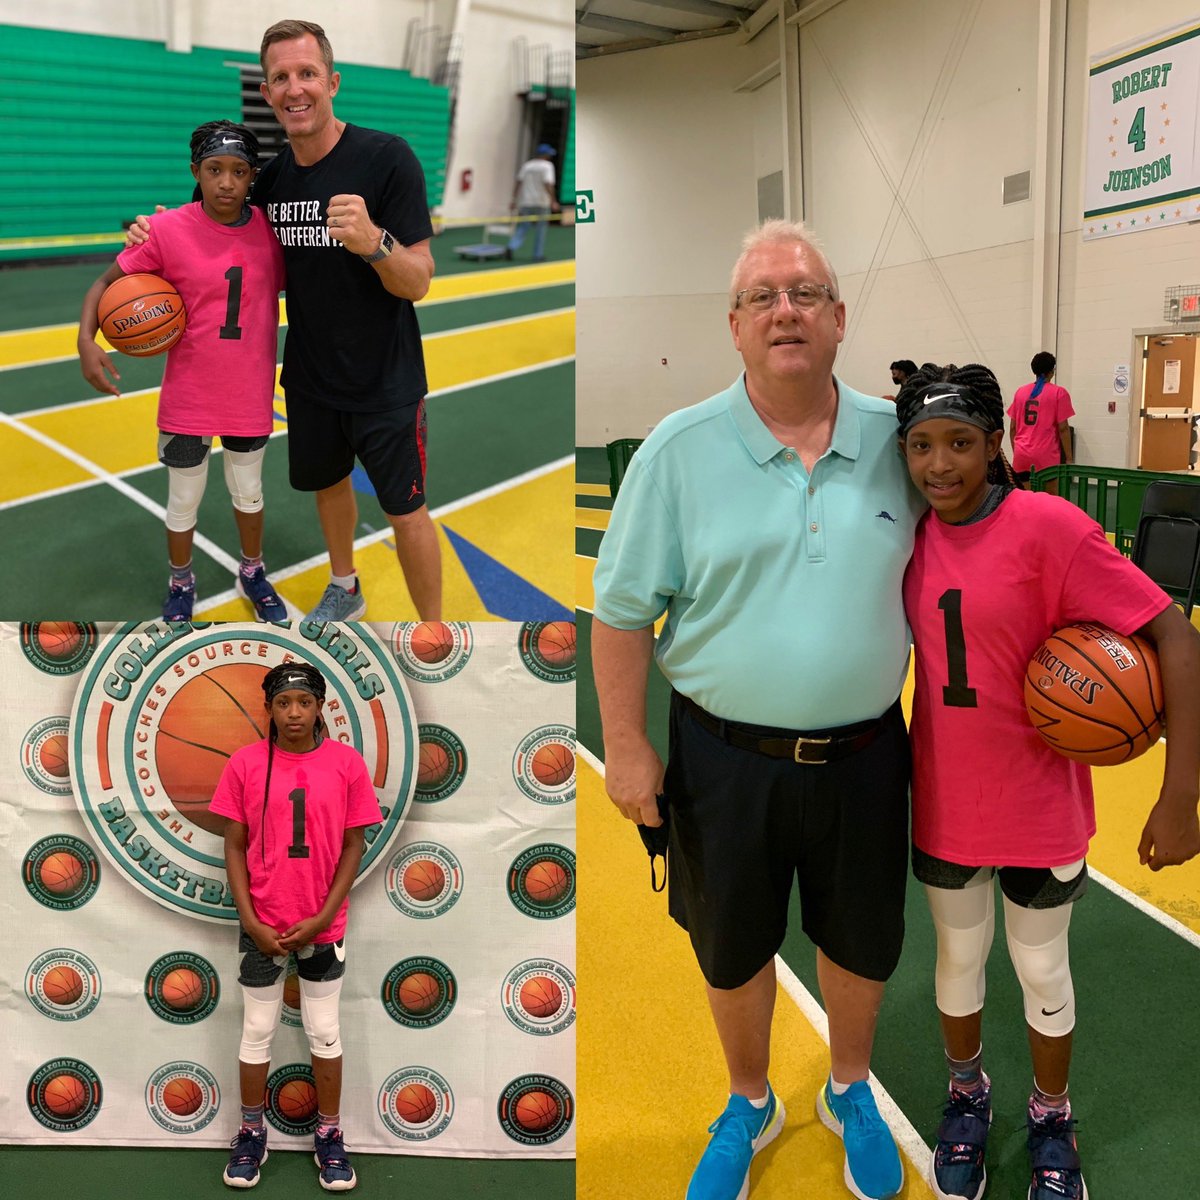 Had a great day at the @cgbr27 camp!!!😤🏀💯 Had a chance to get trained by one of the best around @ganon_baker_ and play with and against some talented young ladies around the world. @bwslgirlsaau @bwsl #bwsl @nyghoops @NYGHoops @coachkent02 @insiderexposure @carolinagirlshoops